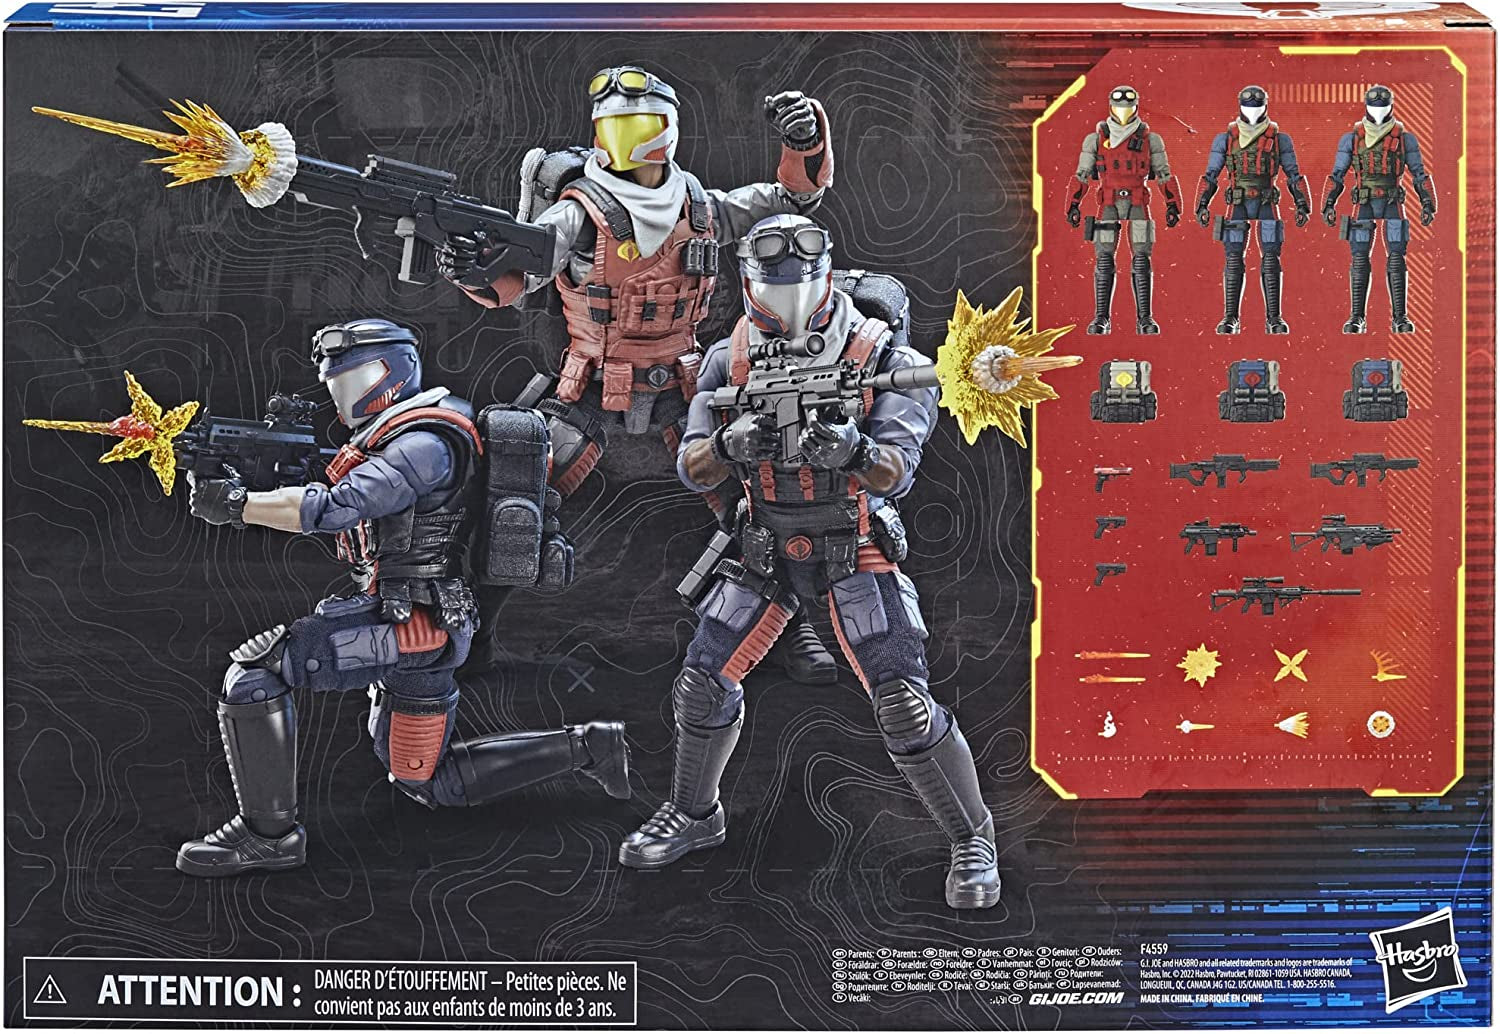 G.I. Joe Classified Series Cobra Viper Officer & Vipers: 6-Inch Scale Action Figures with Premium Design, Accessories, and Custom Packaging